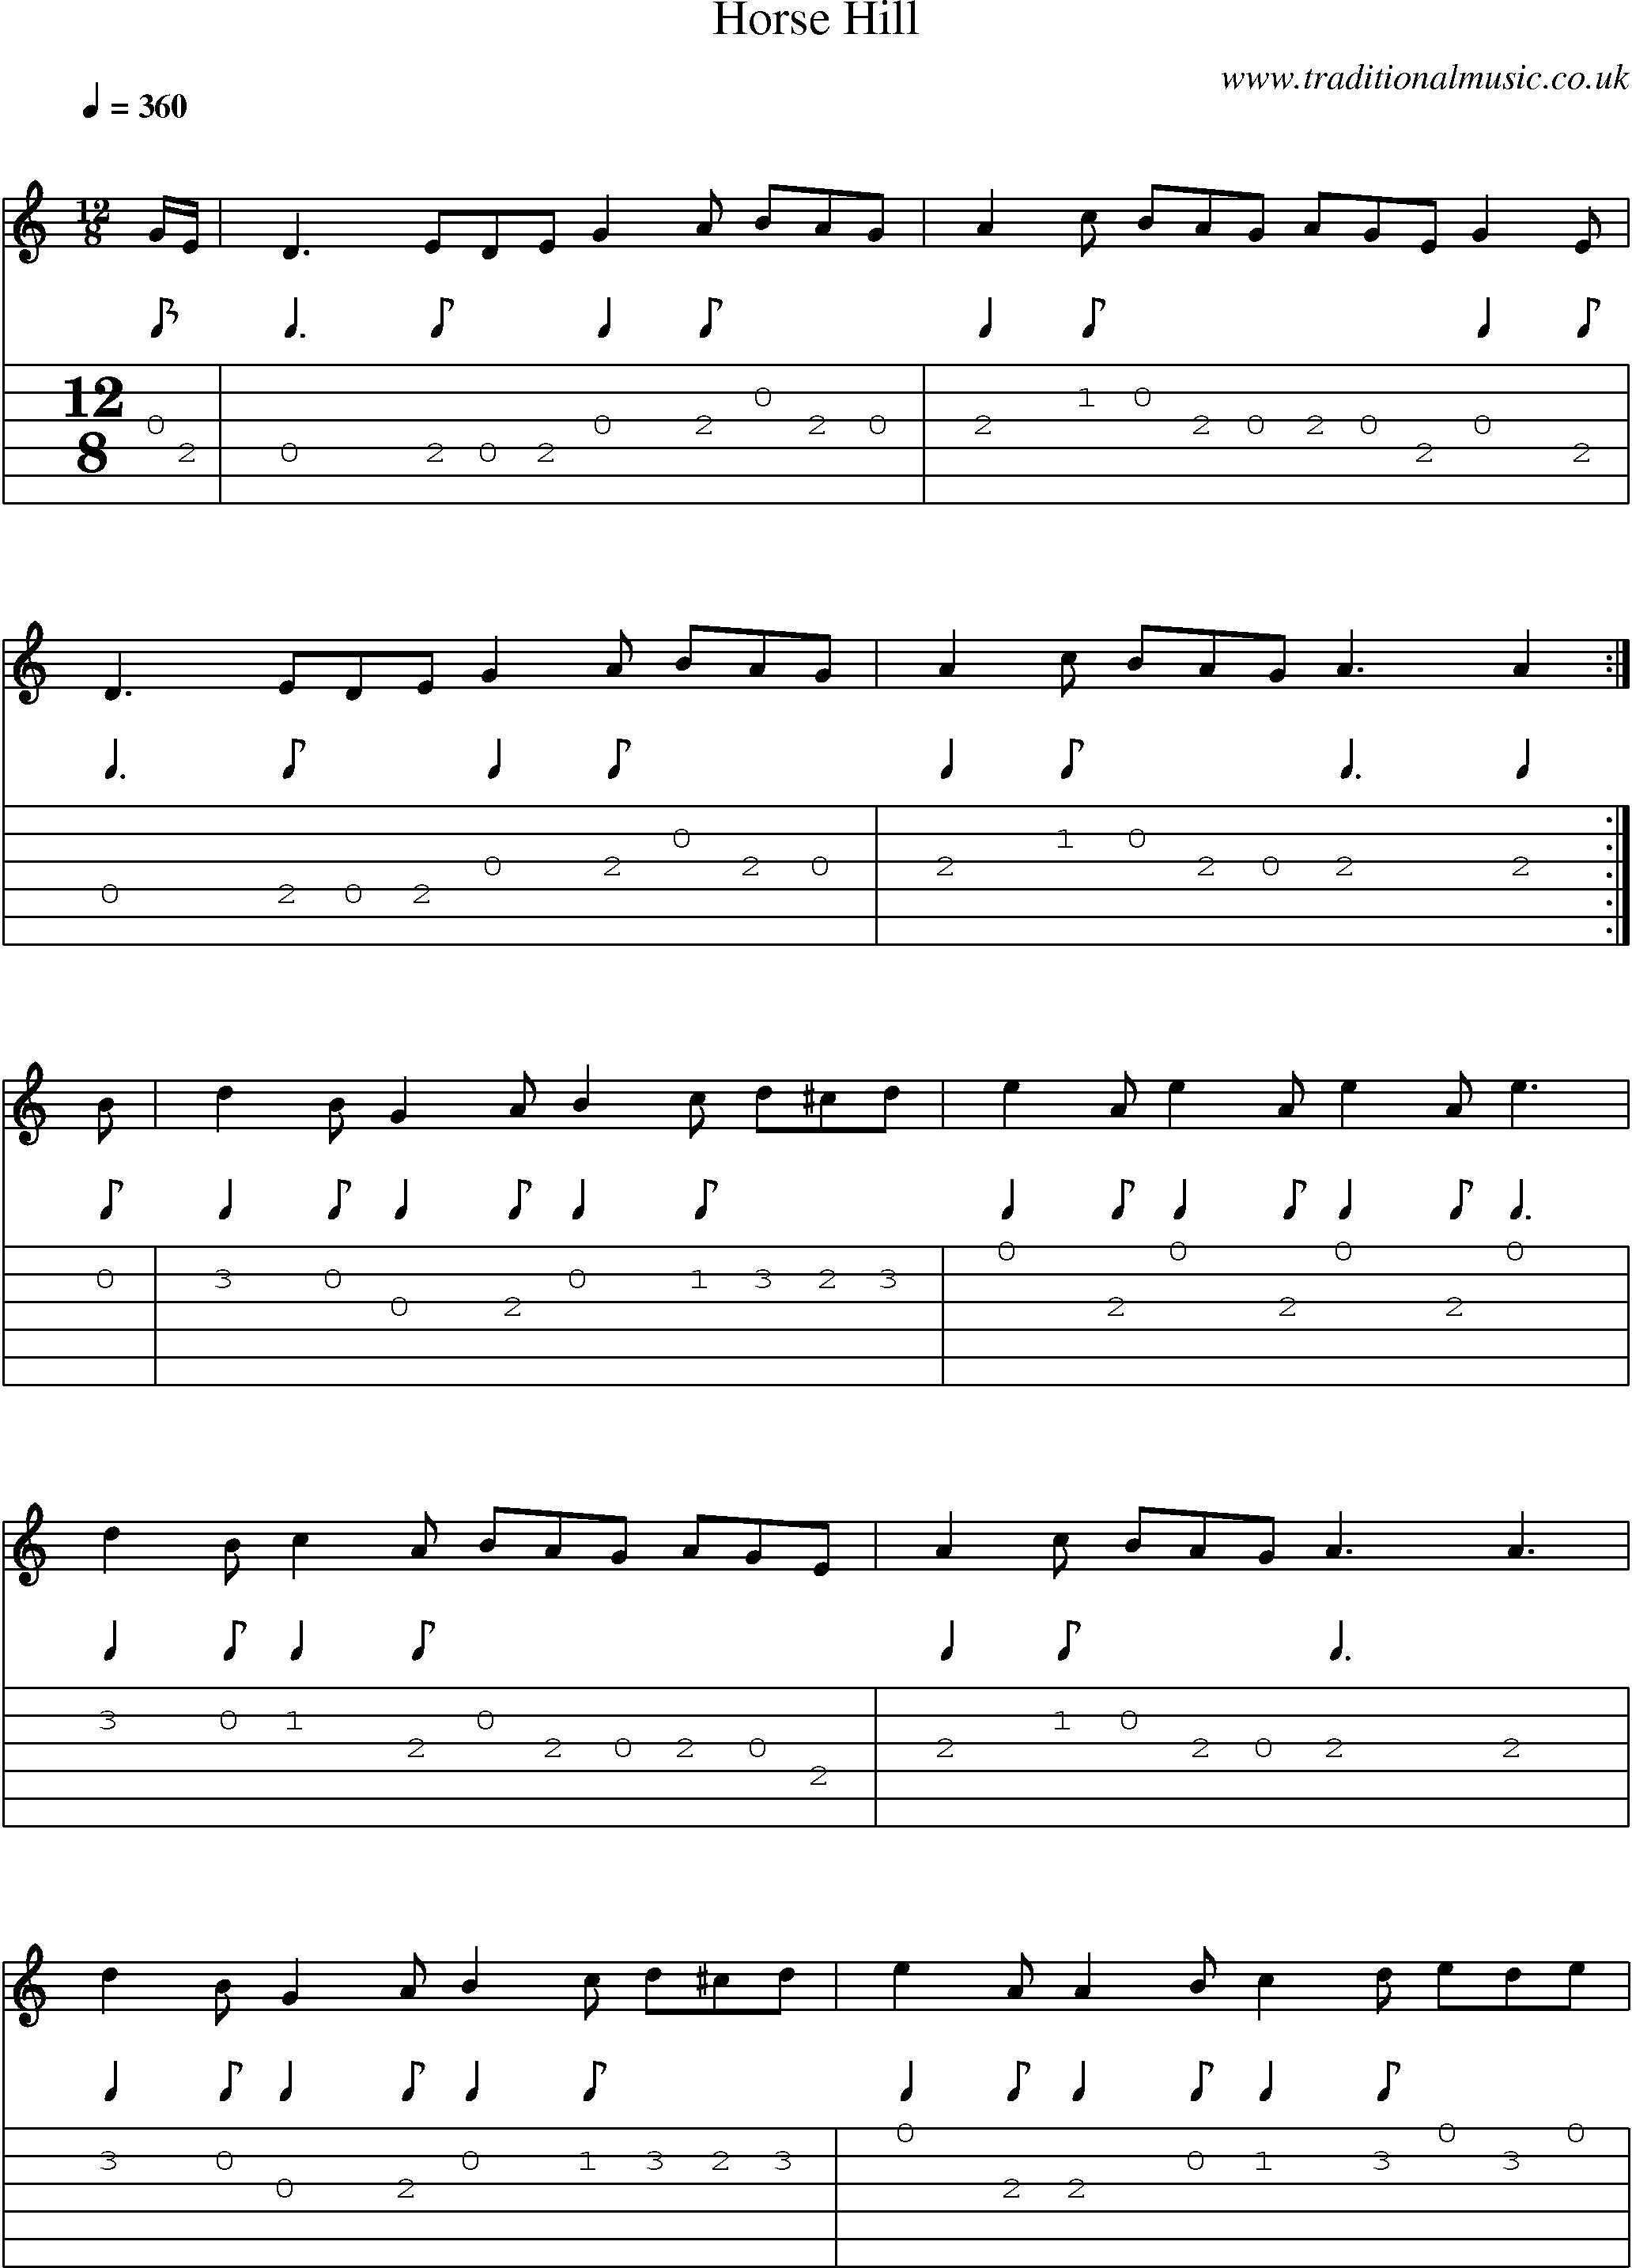 Music Score and Guitar Tabs for Horse Hill